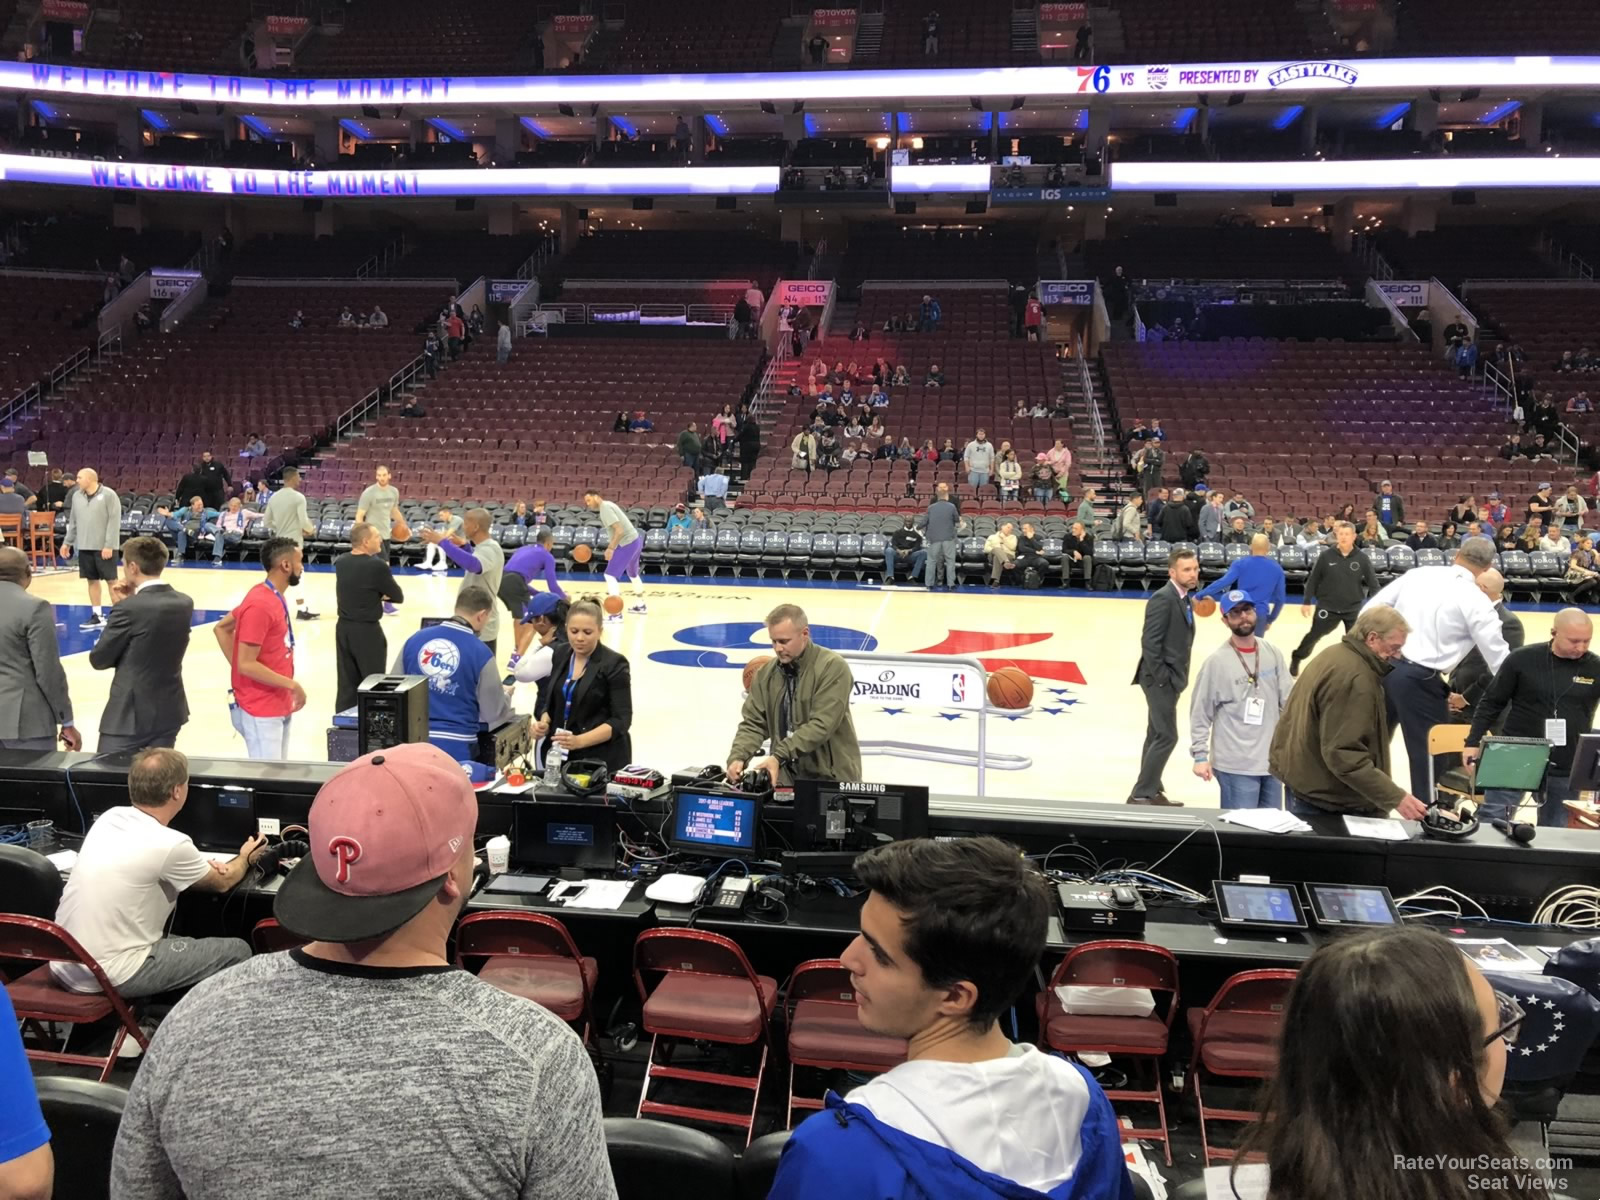 section 101, row 3 seat view  for basketball - wells fargo center